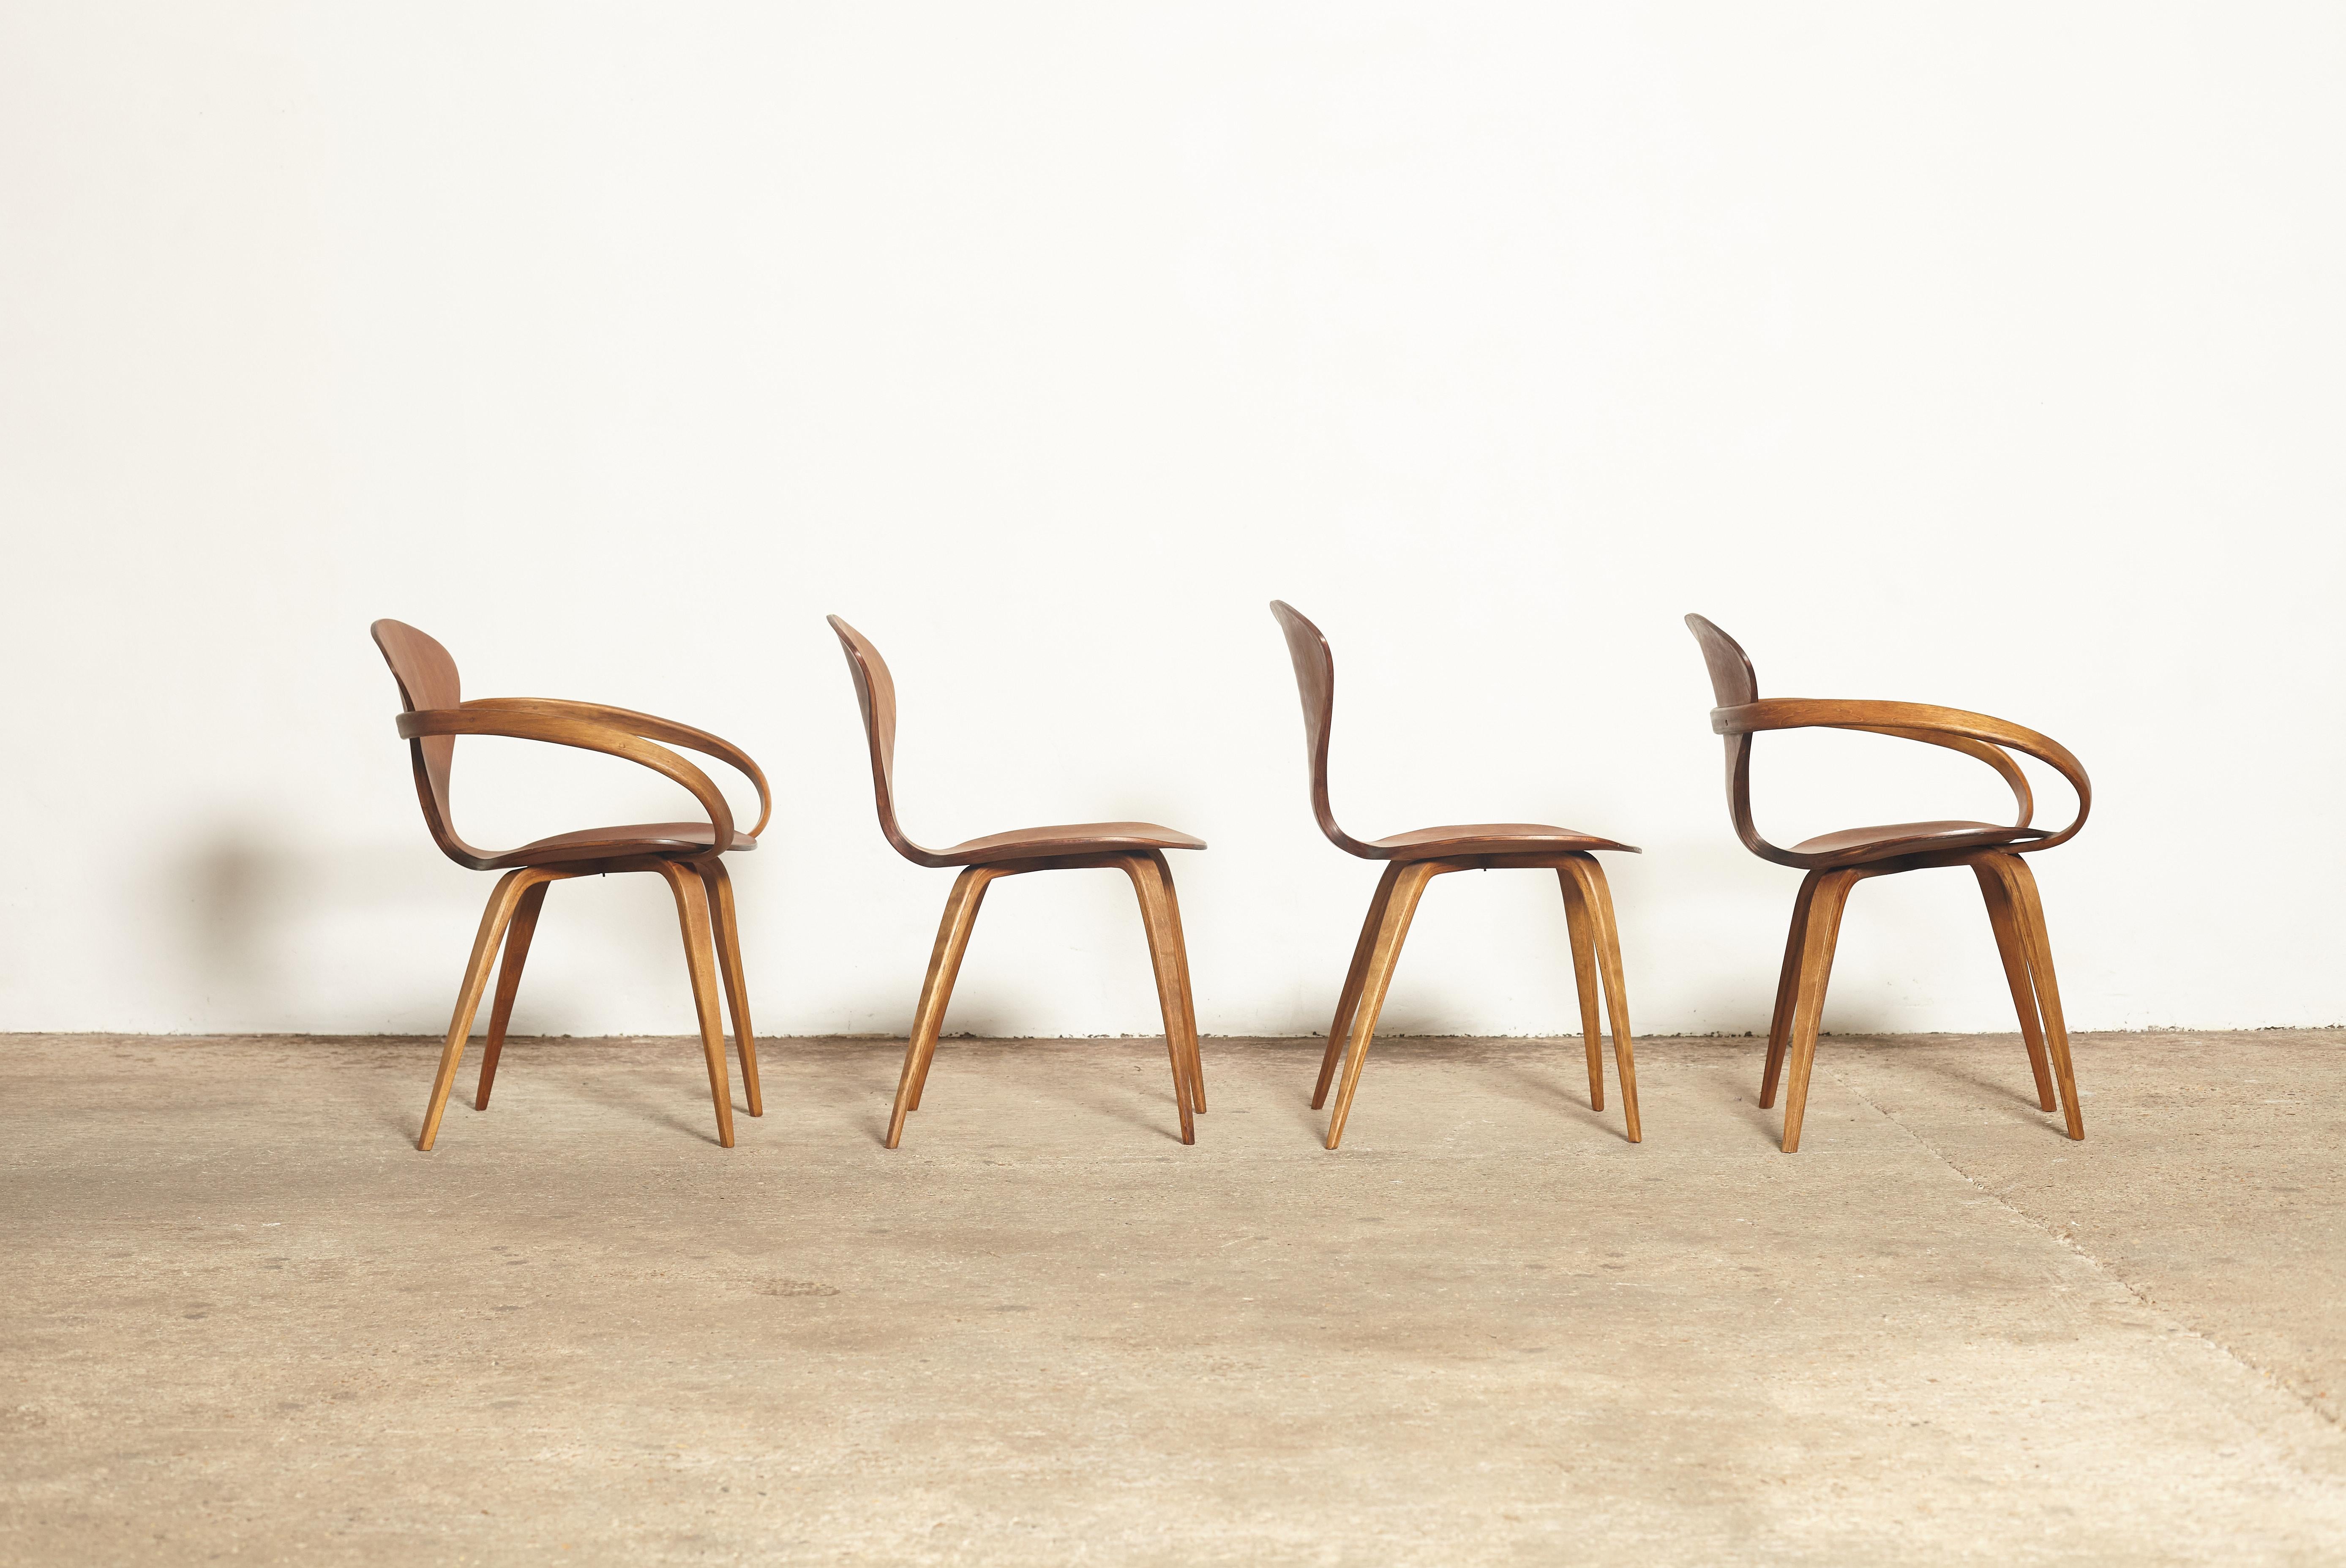 A set of four original Norman Cherner dining chairs, made by Plycraft, USA in the 1960s. Bentwood frames. Plycraft labels to the undersides of three of the chairs.